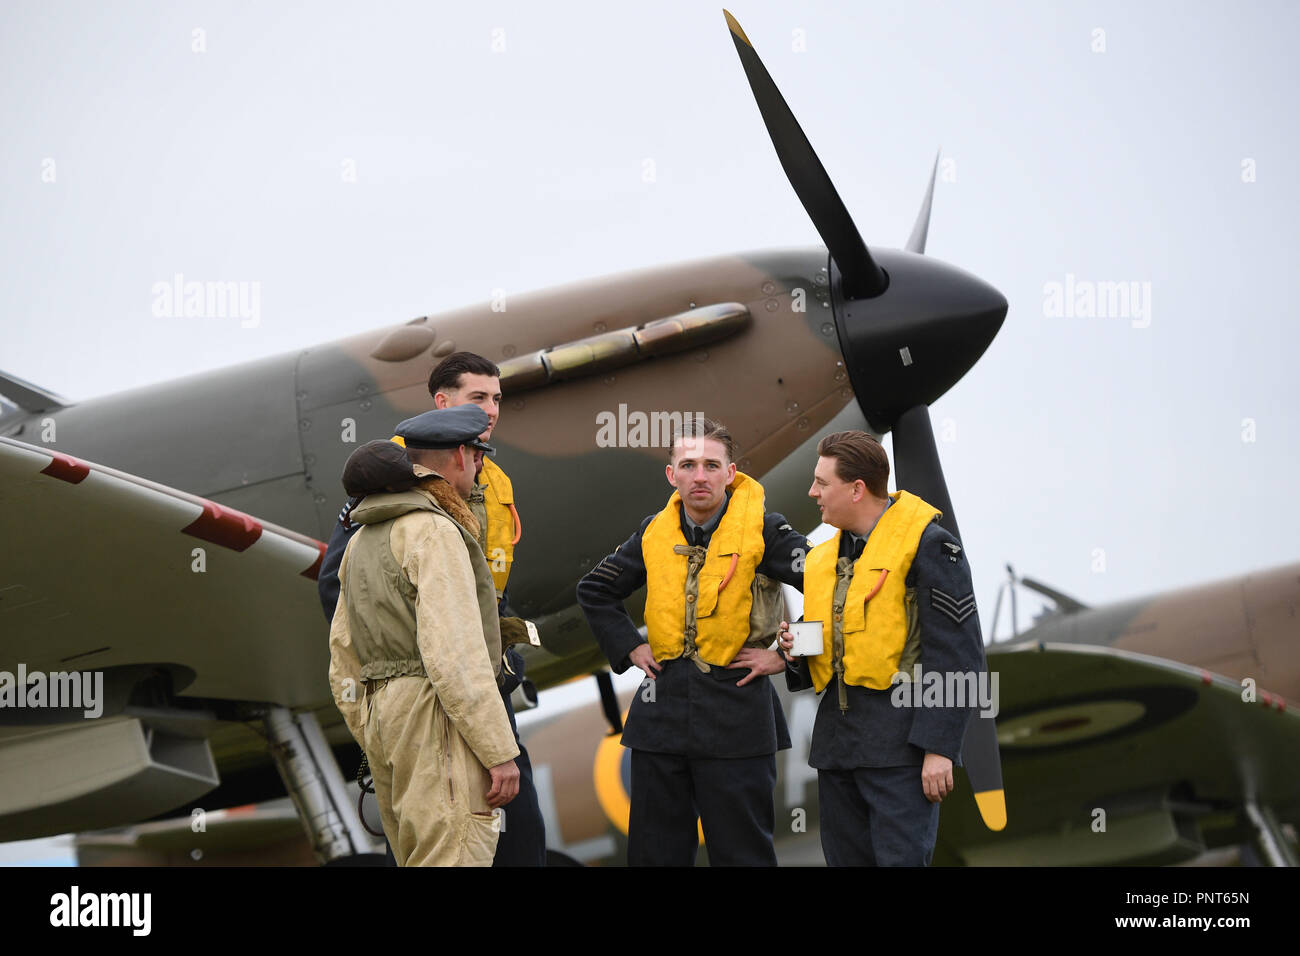 Historical reenactment members from Spirit of Britain (left to right) Darren Porter, Max Birkett, Jack Holt and Alex Hills with a Supermarine Spitfire on the flight line before the Battle of Britain Air Show at the Imperial War Museum in Duxford, Cambridgeshire. Stock Photo